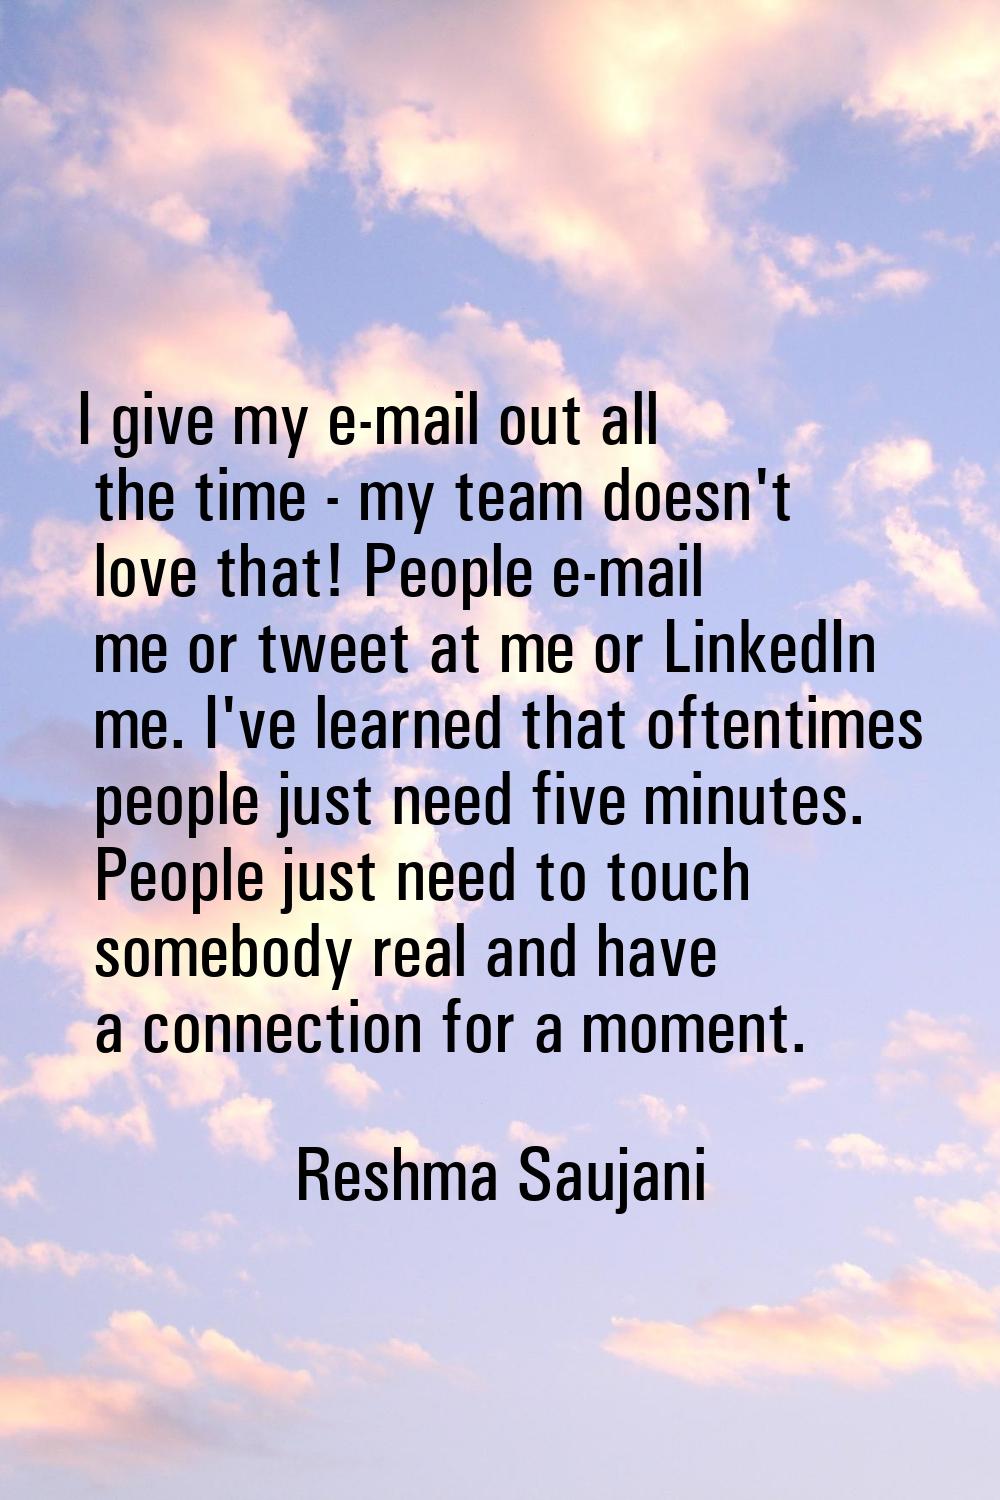 I give my e-mail out all the time - my team doesn't love that! People e-mail me or tweet at me or L